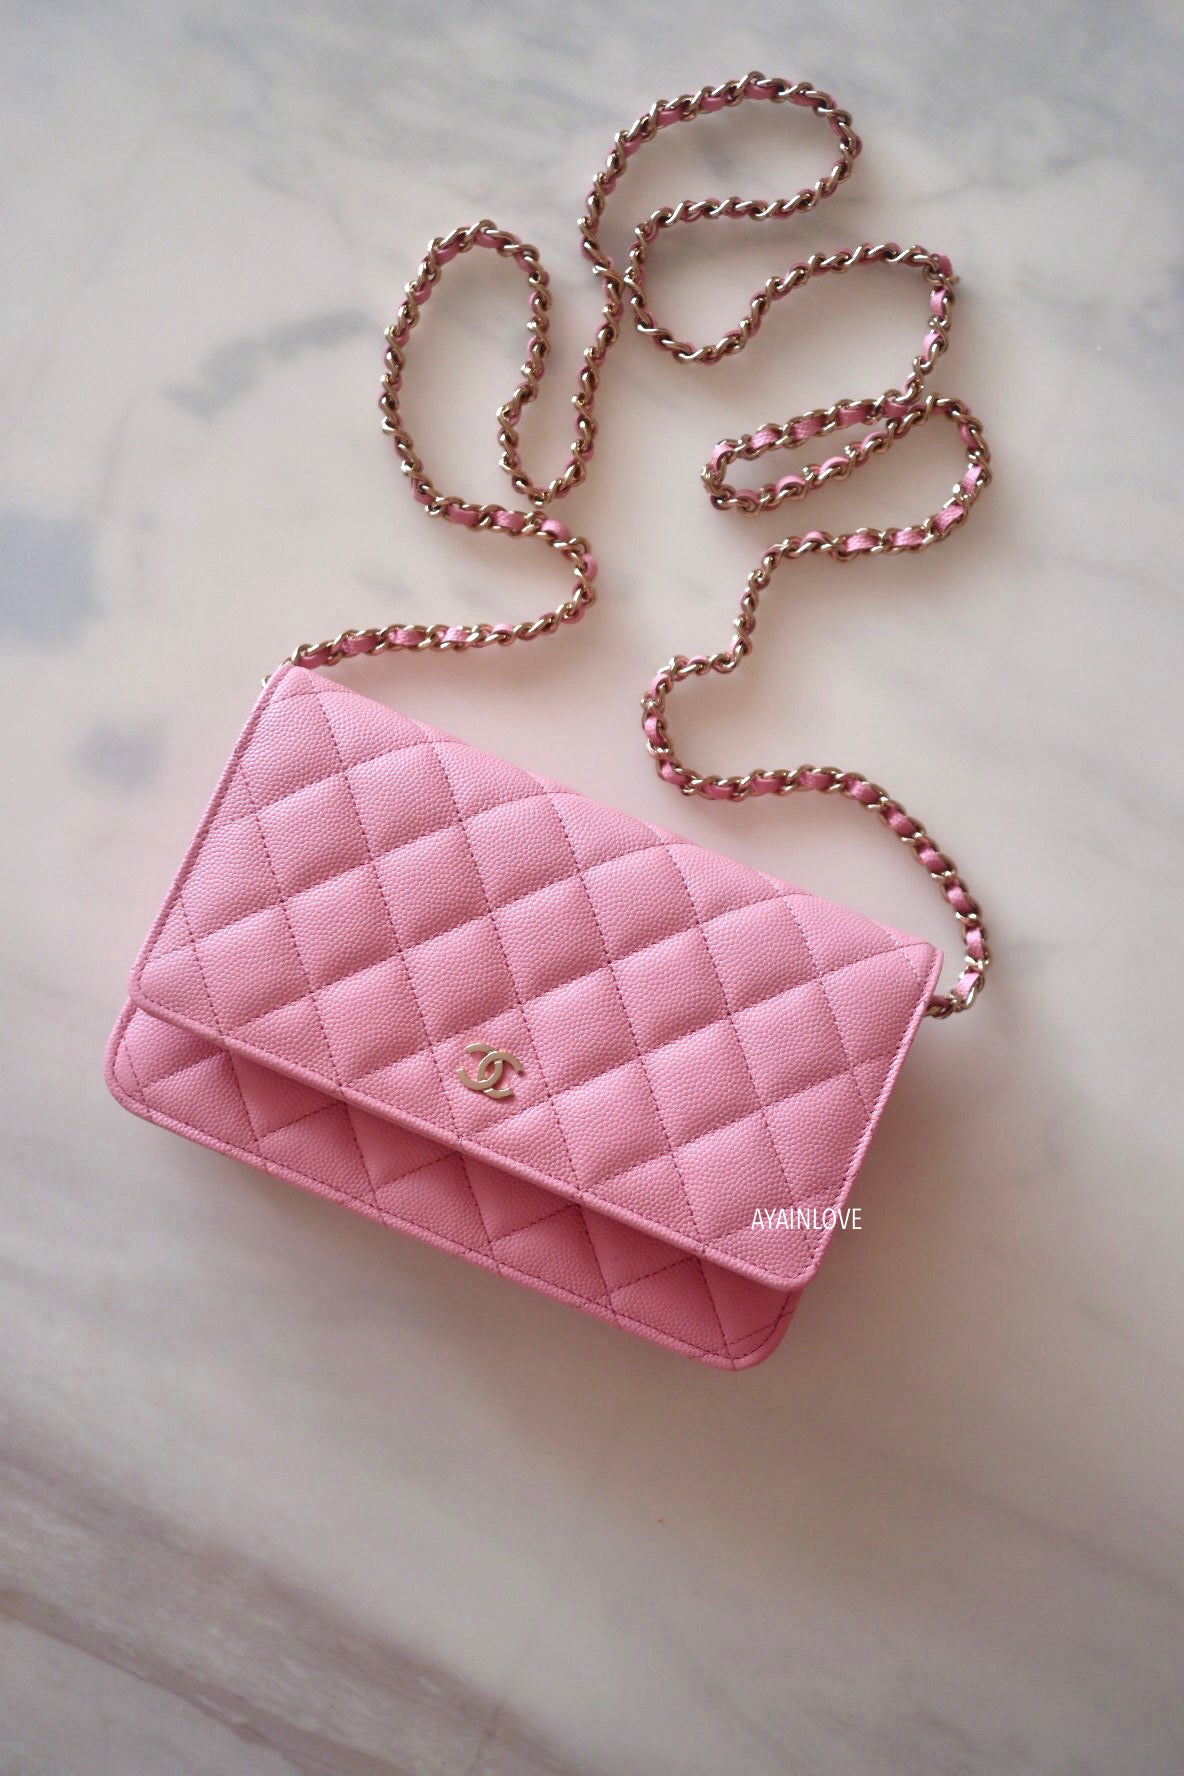 Chanel pink caviar WOC Wallet On Chain 